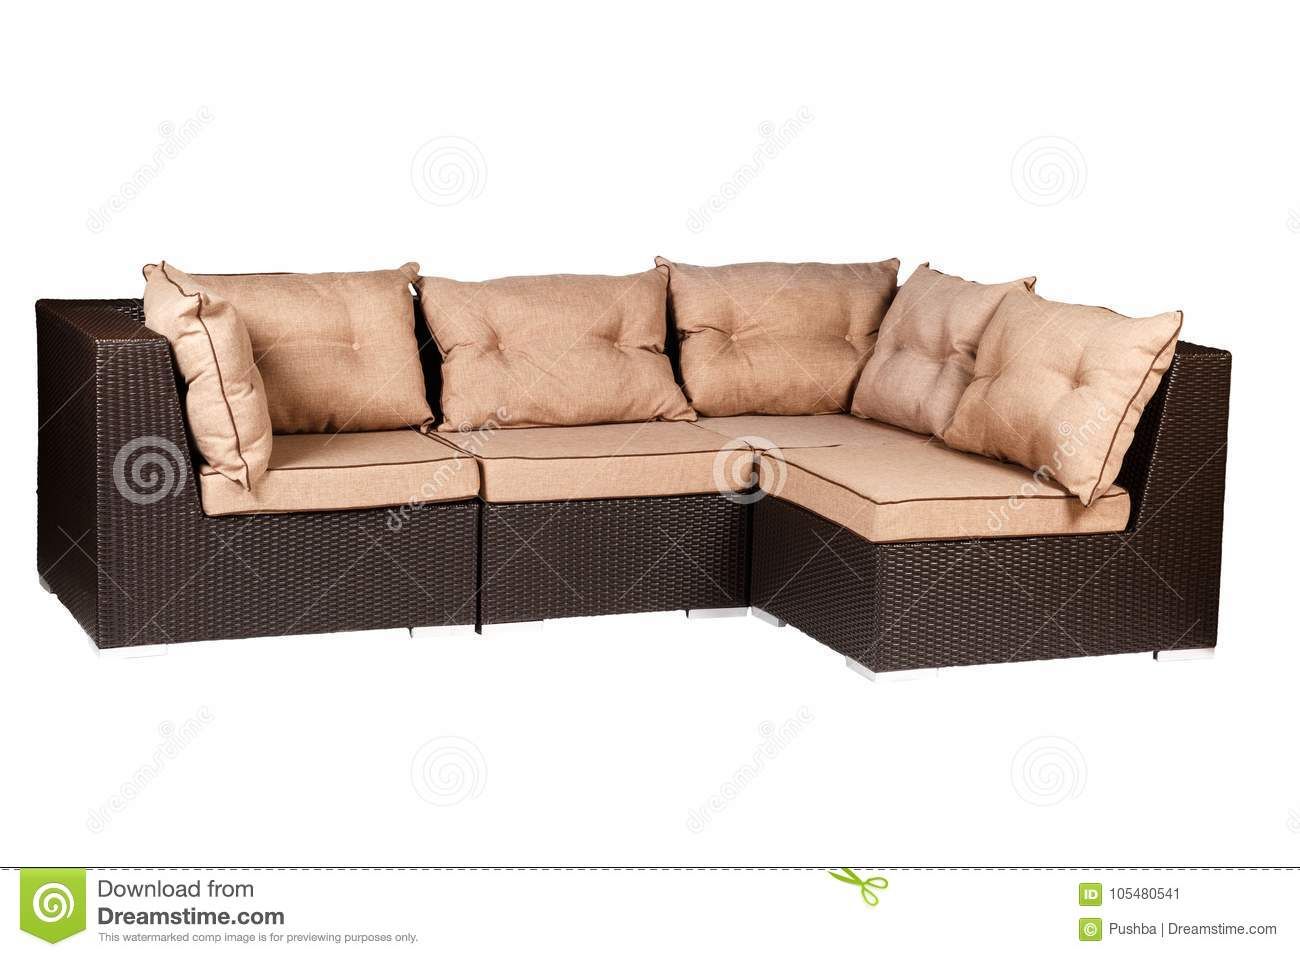 Wicker Sofa With Linen Cushions In Sand Color Stock Image Within Setoril Modern Sectional Sofa Swith Chaise Woven Linen (View 4 of 15)